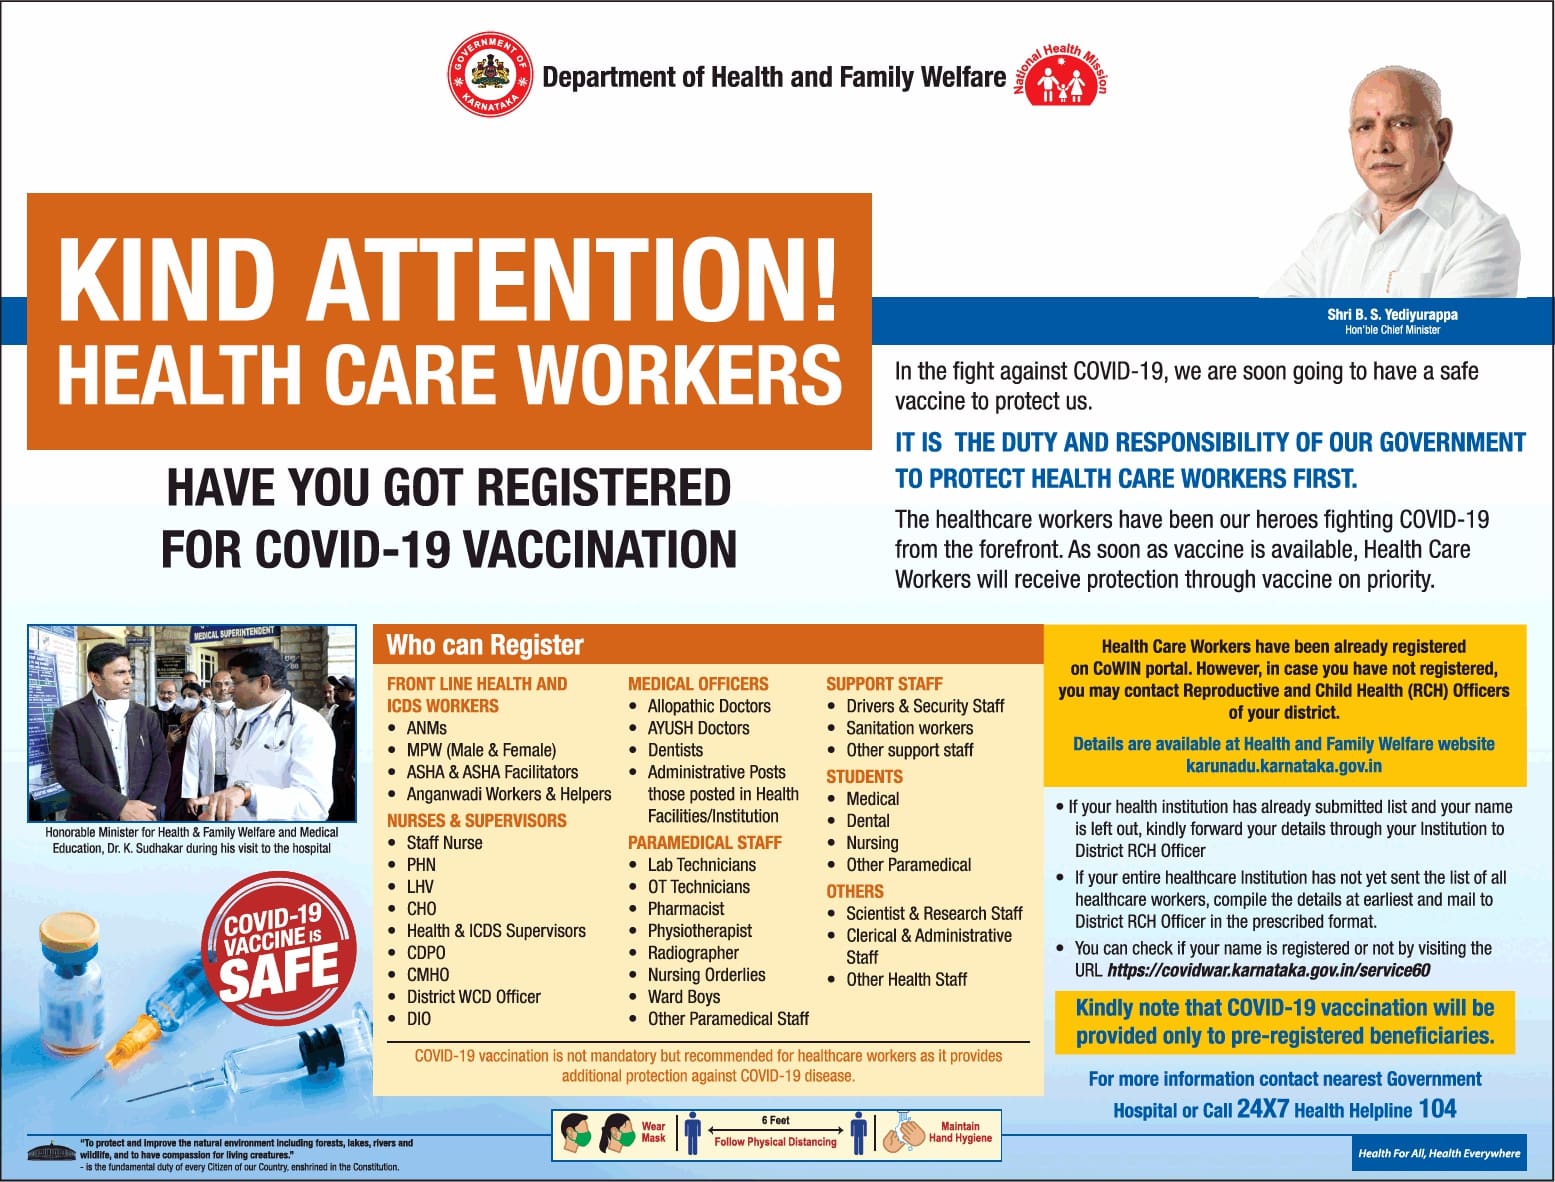 department-of-health-and-family-welfare-kind-attention-health-care-workers-ad-times-of-india-bangalore-08-01-2021